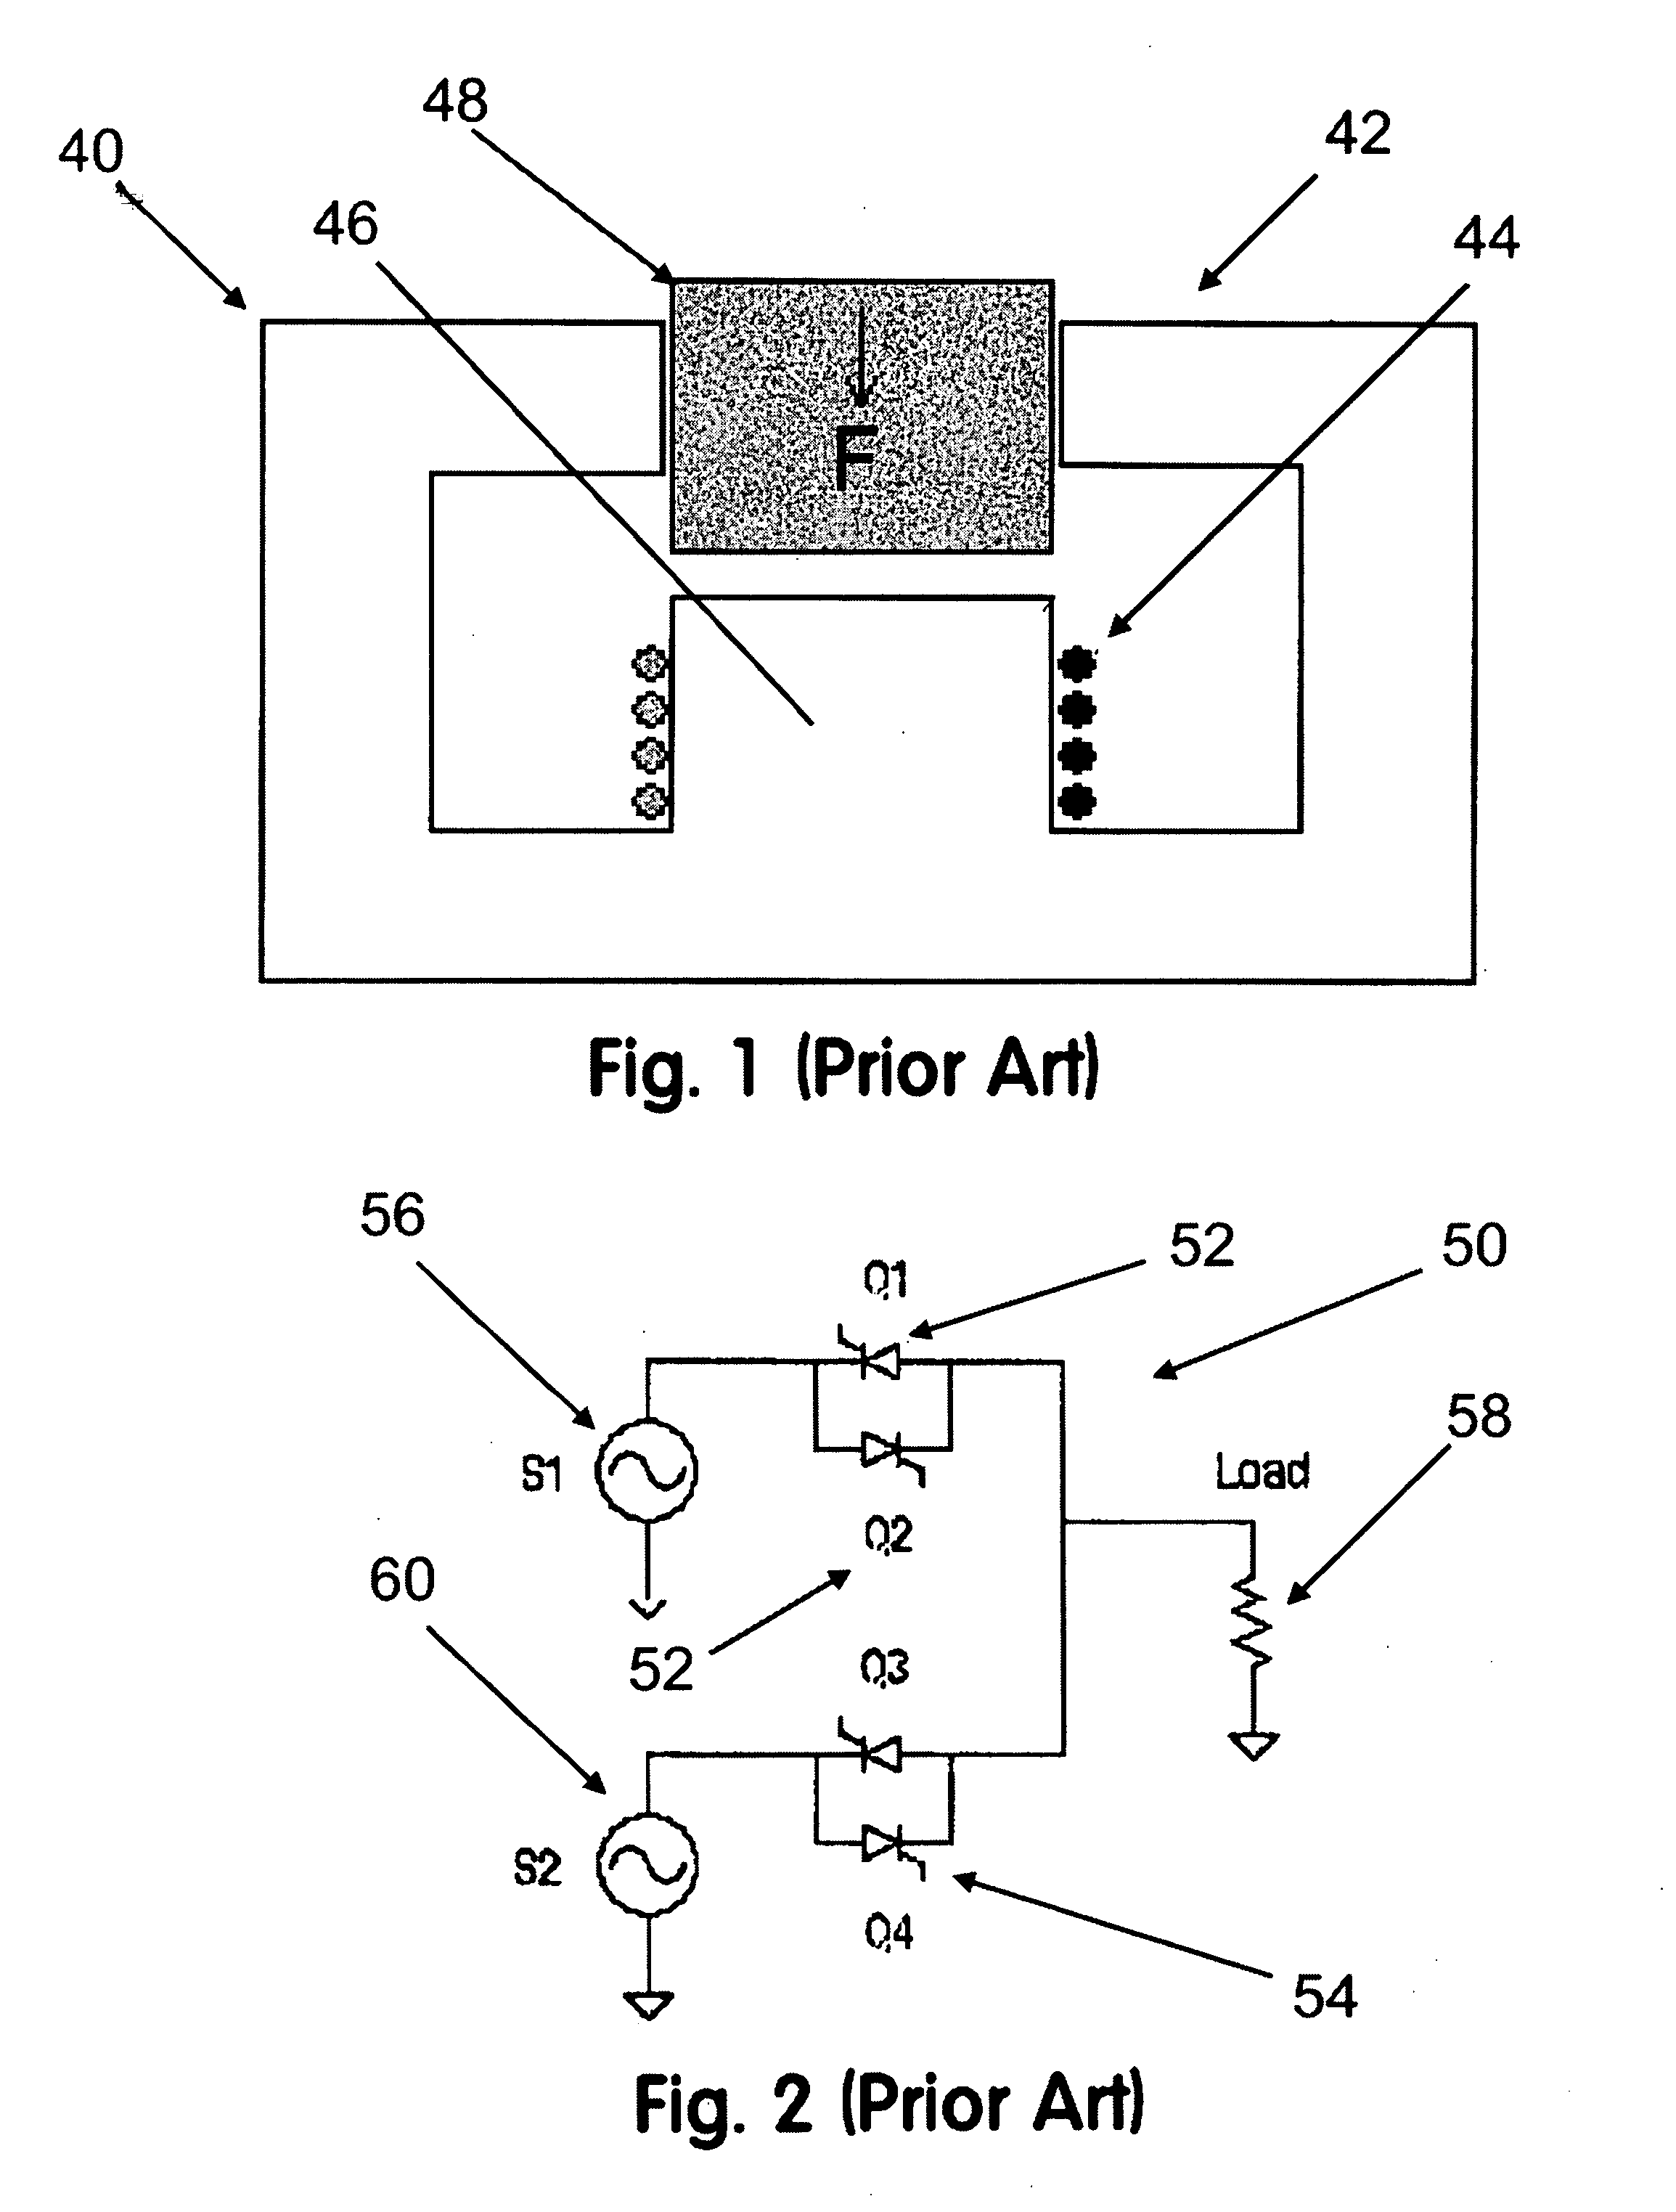 Eddy current inductive drive electromechanical linear actuator and switching arrangement